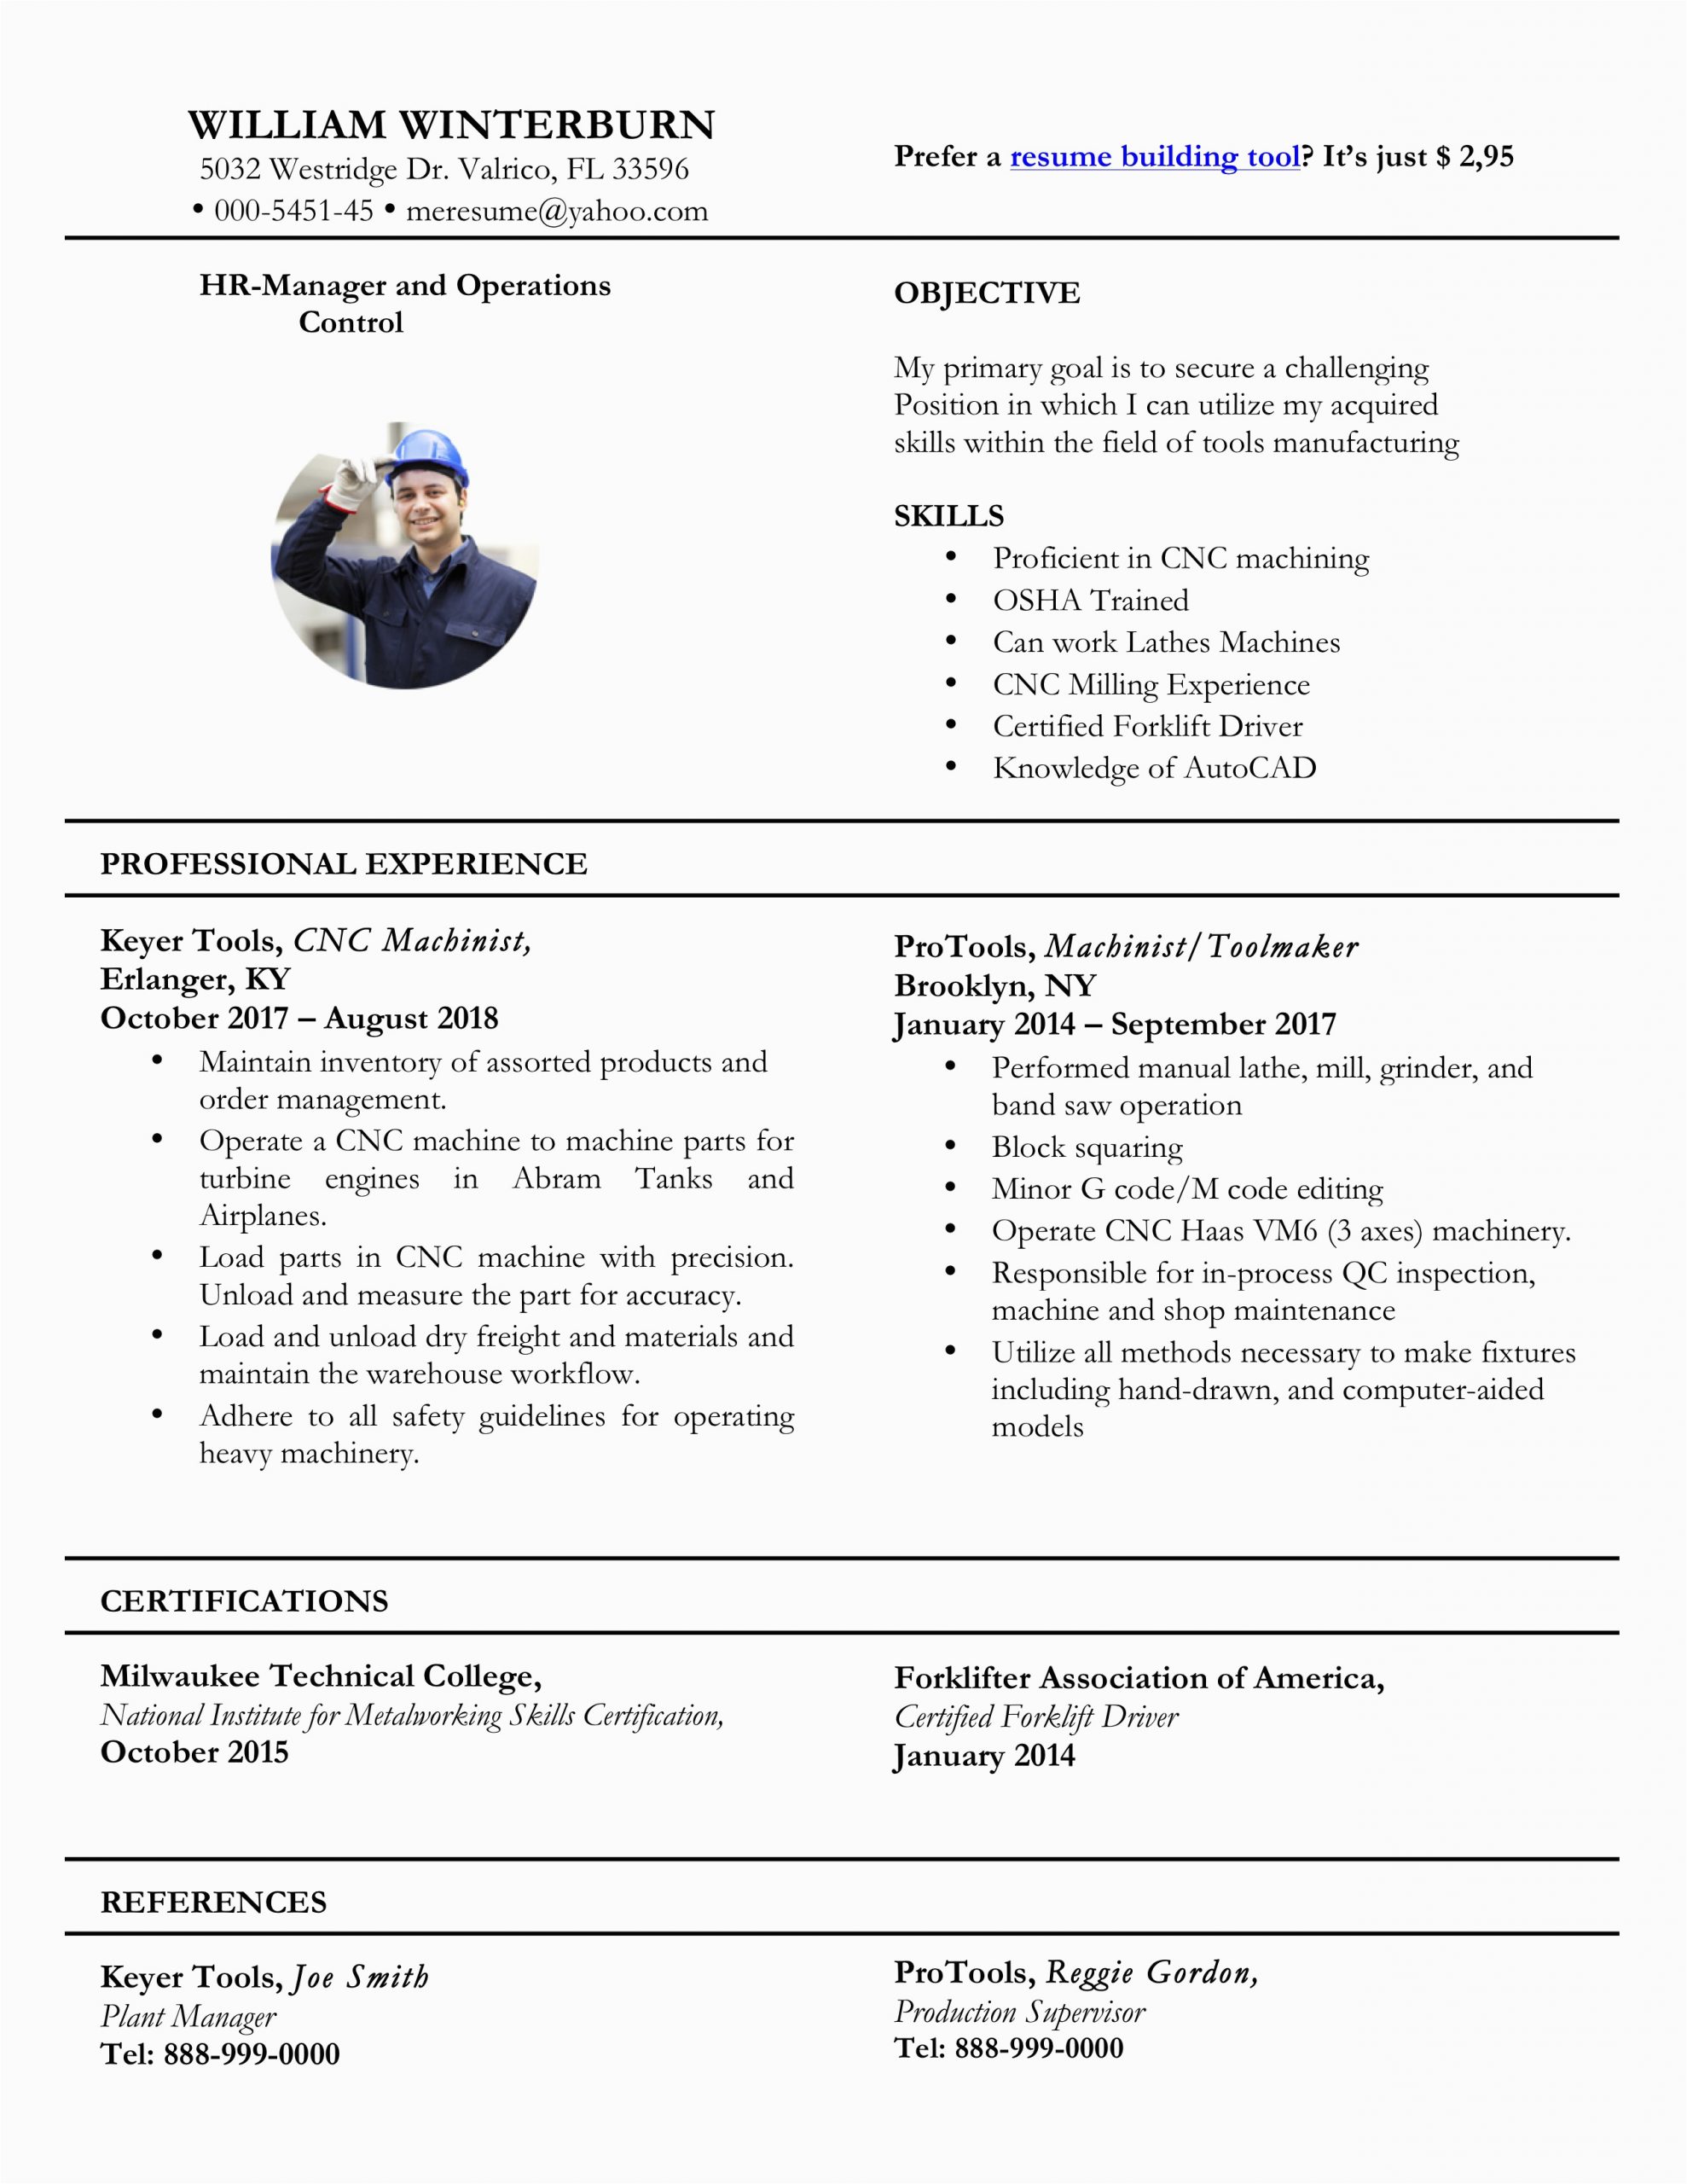 Sample Resume format Download Ms Word Resume Templates [2019] Pdf and Word